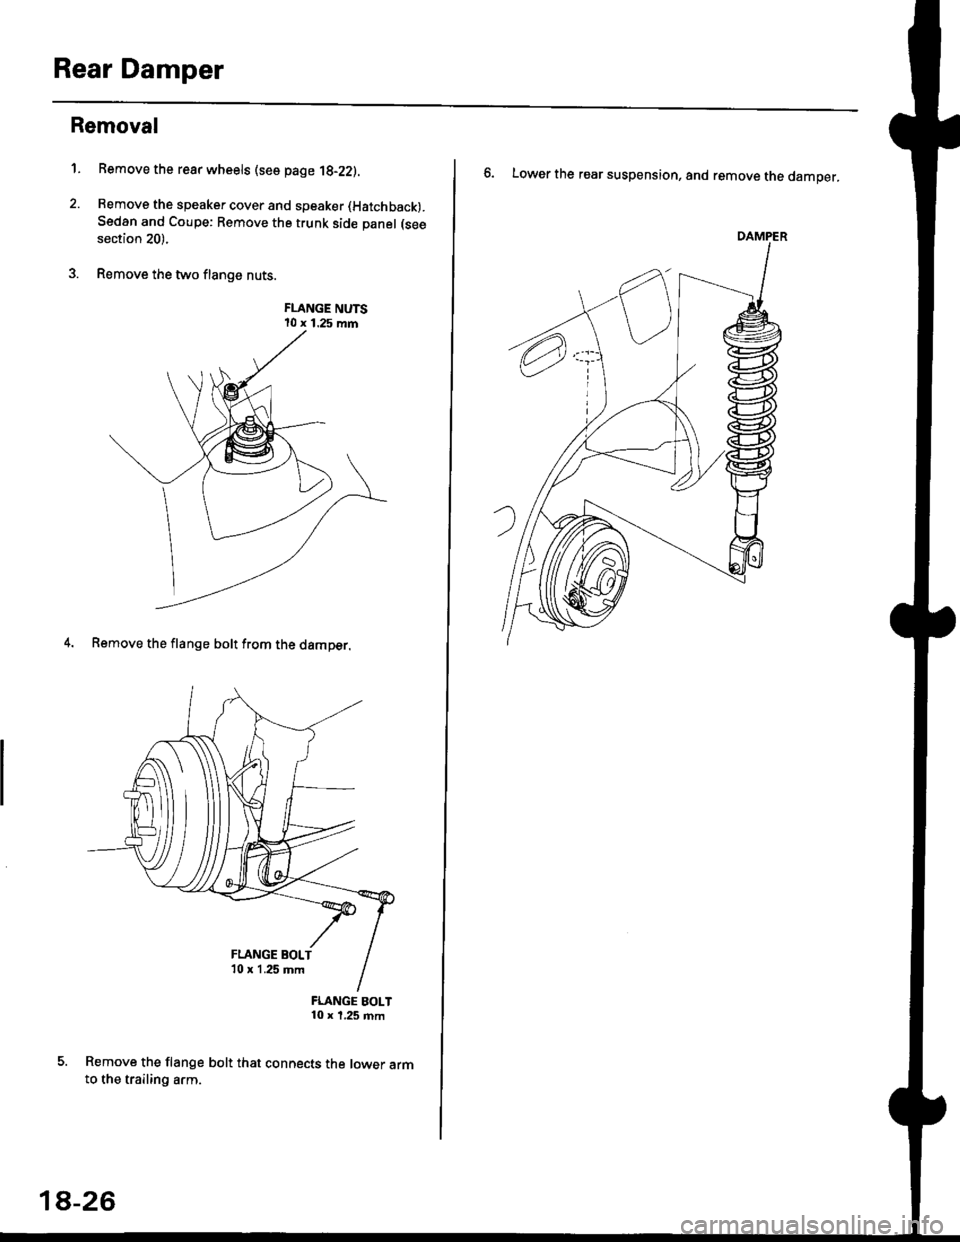 HONDA CIVIC 1996 6.G Owners Guide Rear Damper
Removal
1. Bemove the rear wheels (see page 1g-22).
2. Remove the speaker cover and speaker (Hatchback).
Sedan and Coupe: Remove the trunk side panel (see
section 20).
3. Remove the two fl